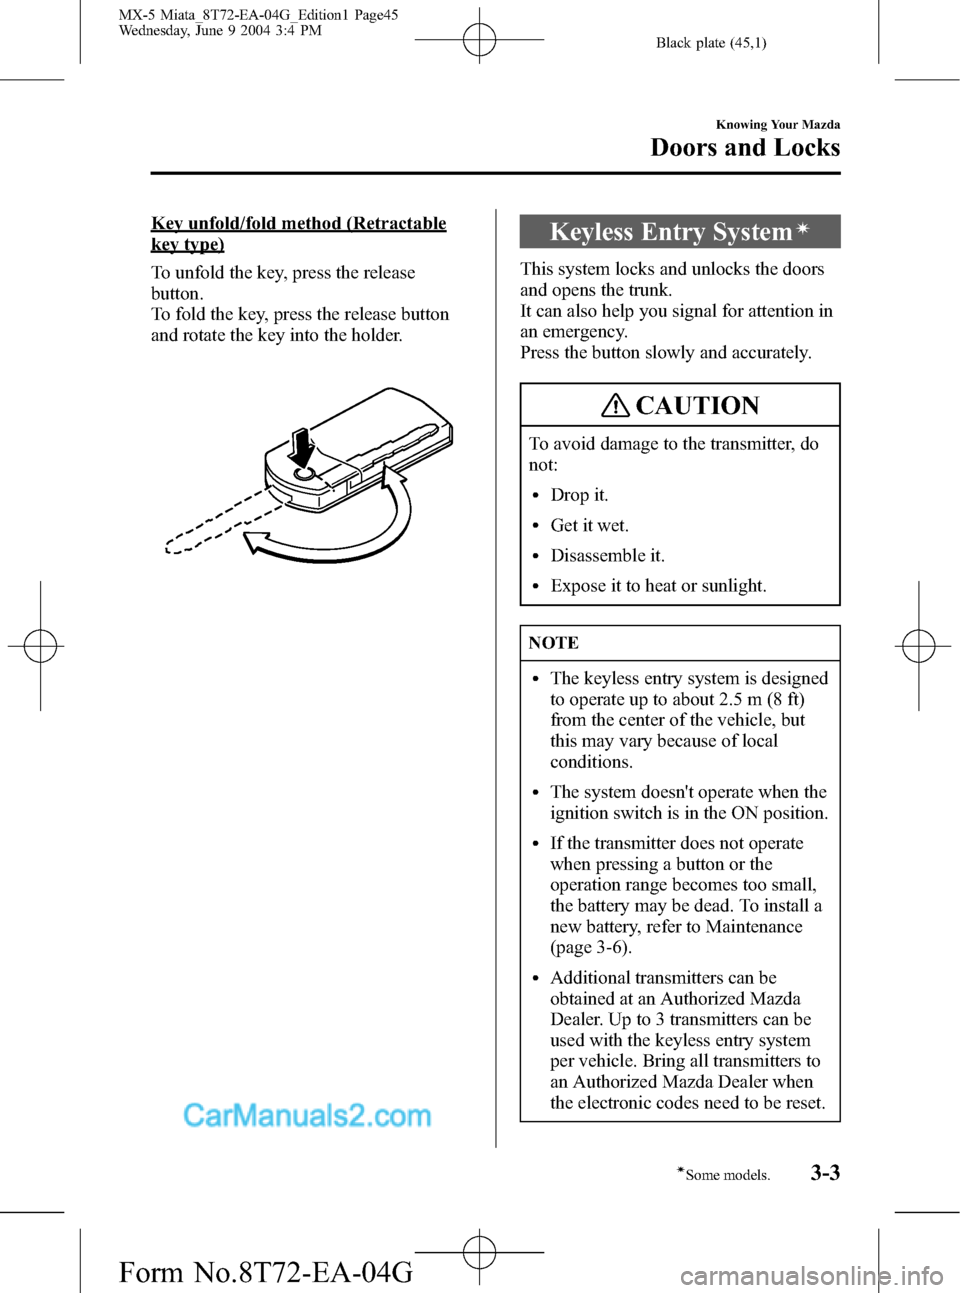 MAZDA MODEL MX-5 2005  Owners Manual (in English) Black plate (45,1)
Key unfold/fold method (Retractable
key type)
To unfold the key, press the release
button.
To fold the key, press the release button
and rotate the key into the holder.Keyless Entry